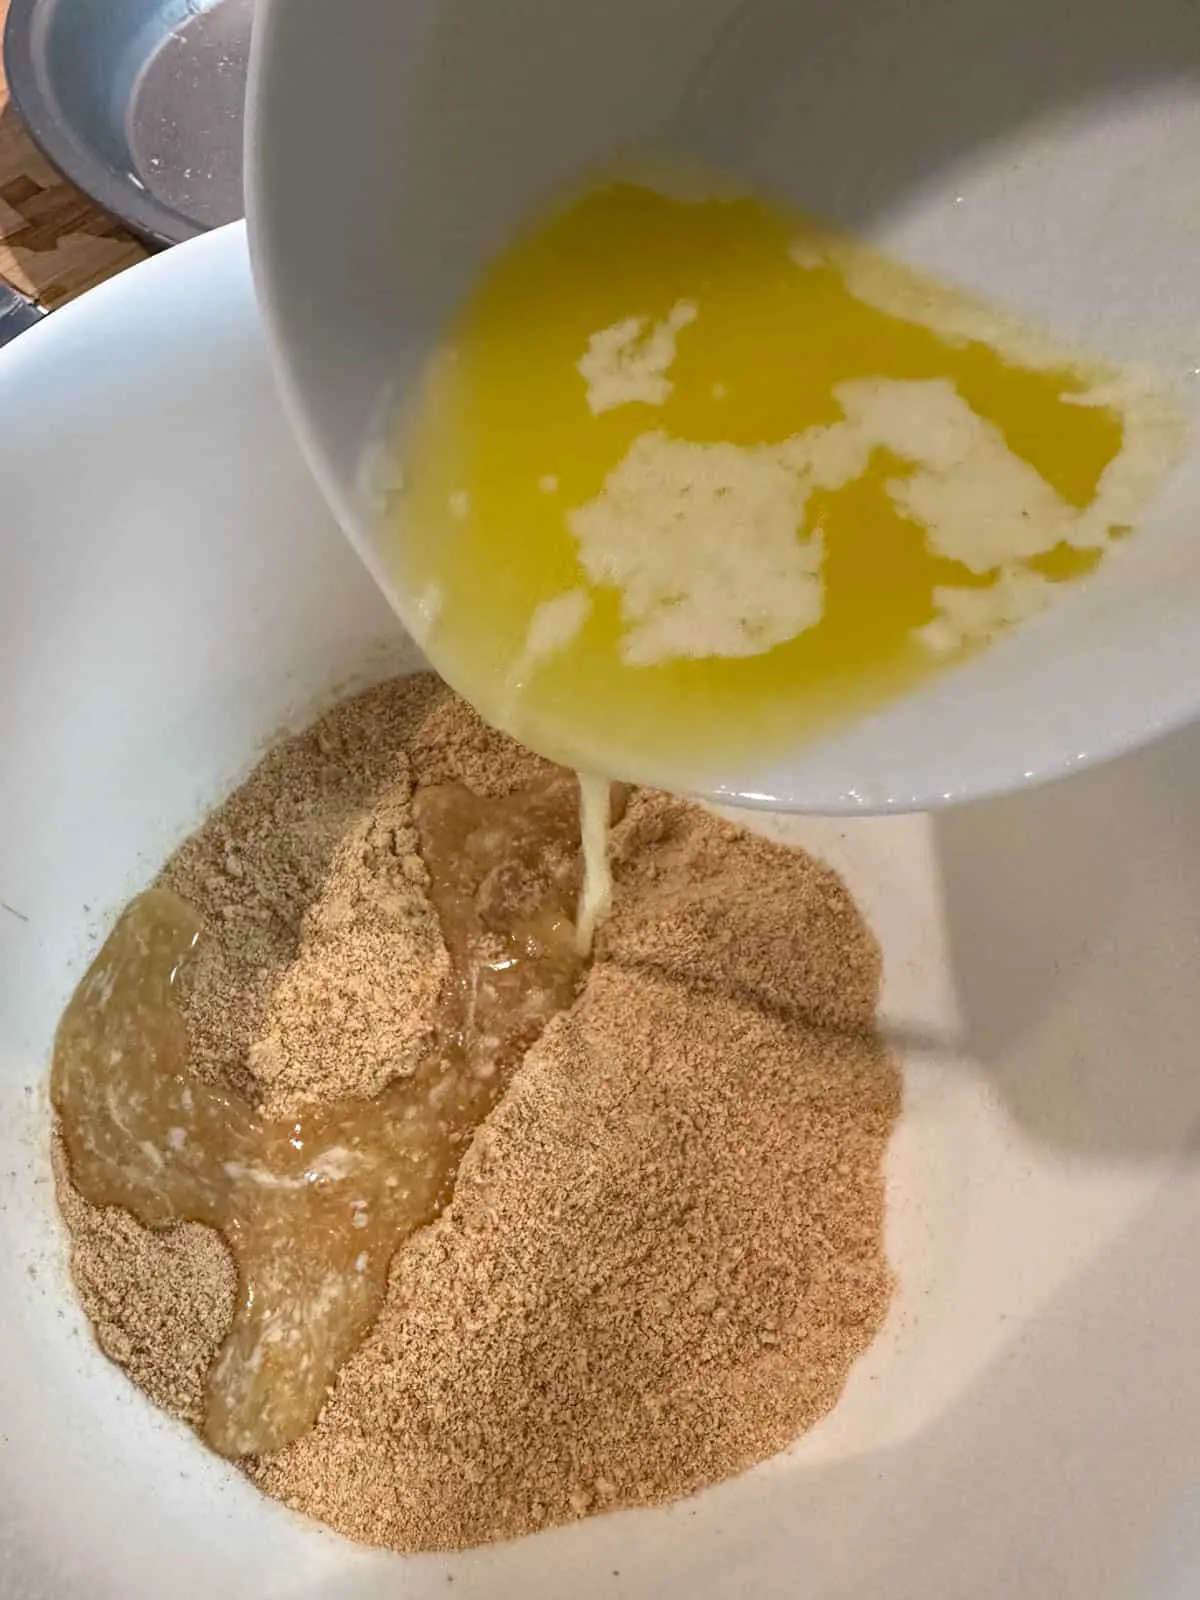 A mixing bowl containing crushed graham crackers. There is a white bowl containing melted butter that is being poured into the mixing bowl.